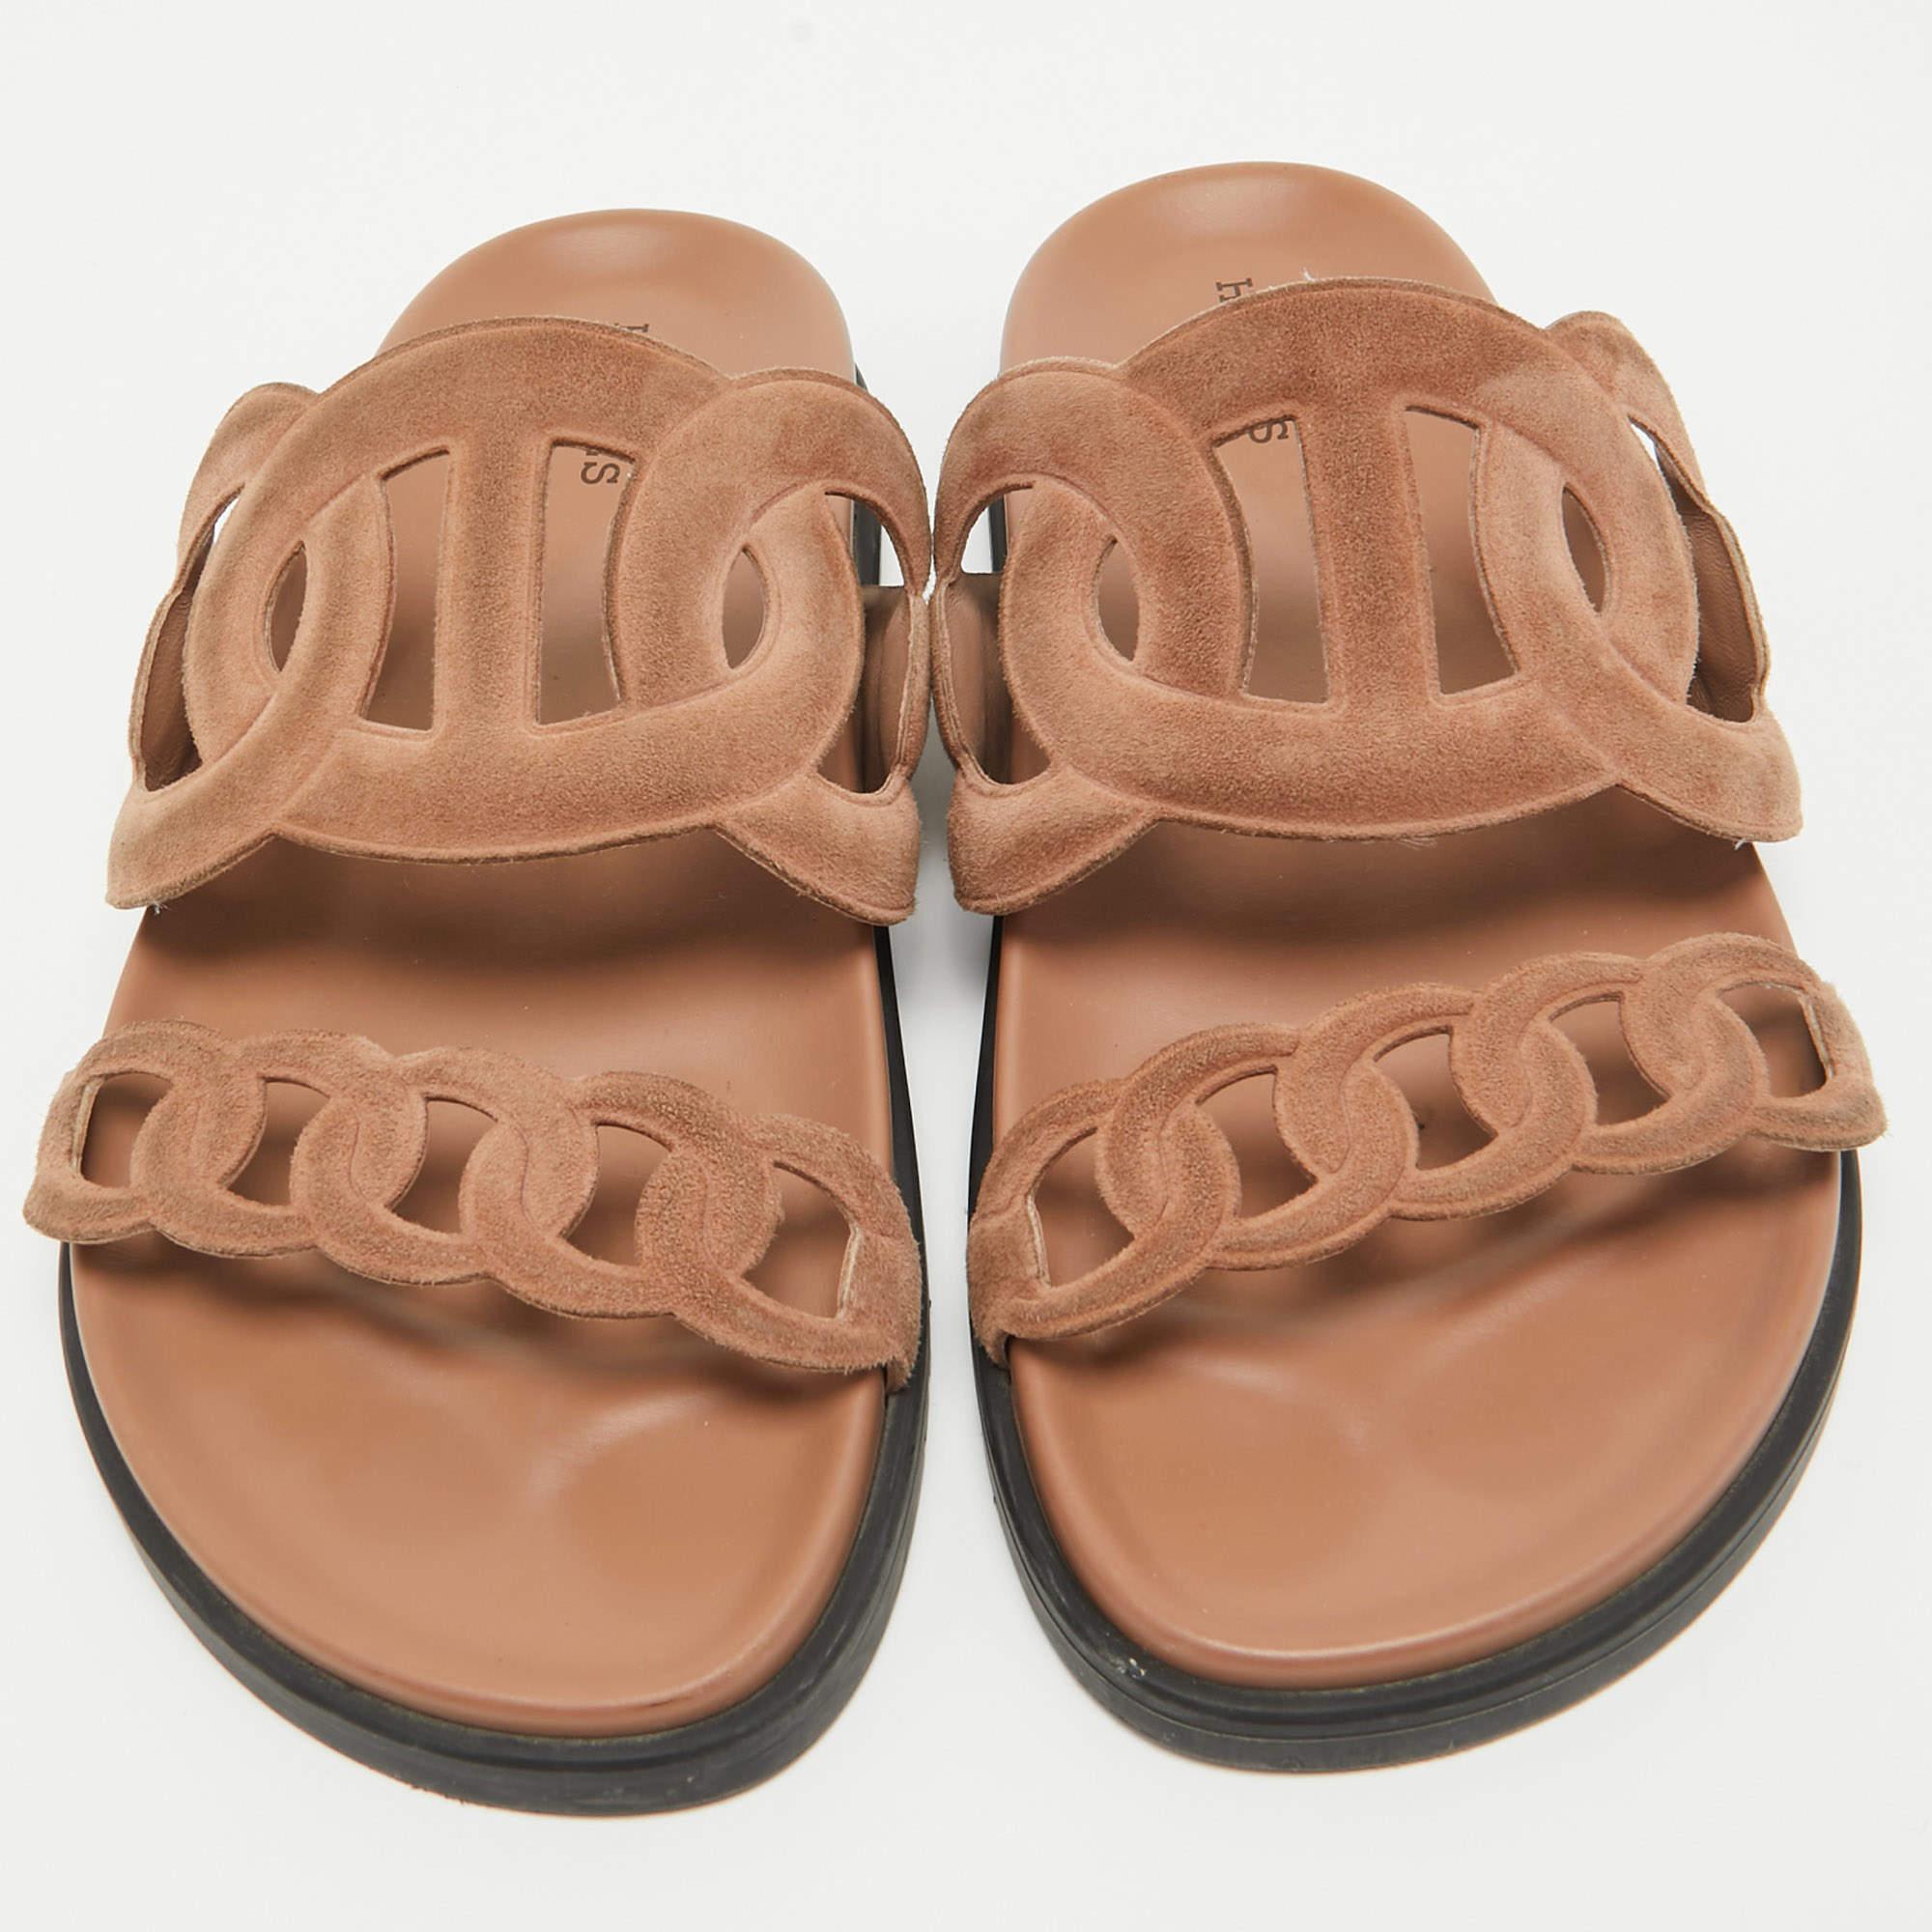 Let this comfortable pair be your first choice when you're out for a long day. These Hermes slides have well-sewn uppers beautifully set on durable soles.

Includes: Original Dustbag

